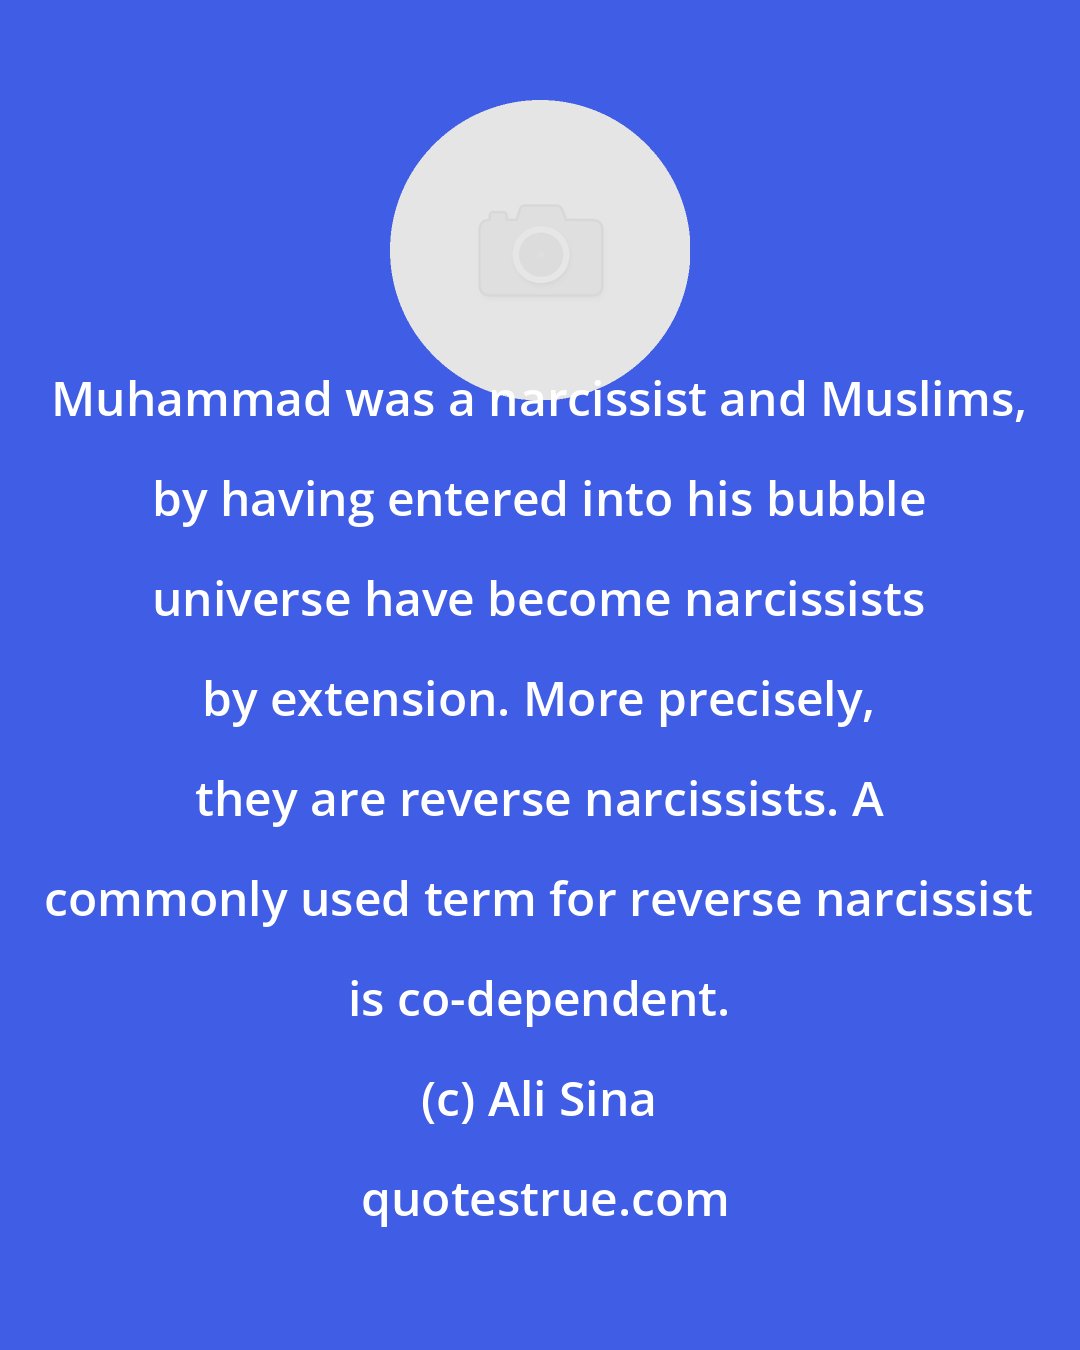 Ali Sina: Muhammad was a narcissist and Muslims, by having entered into his bubble universe have become narcissists by extension. More precisely, they are reverse narcissists. A commonly used term for reverse narcissist is co-dependent.